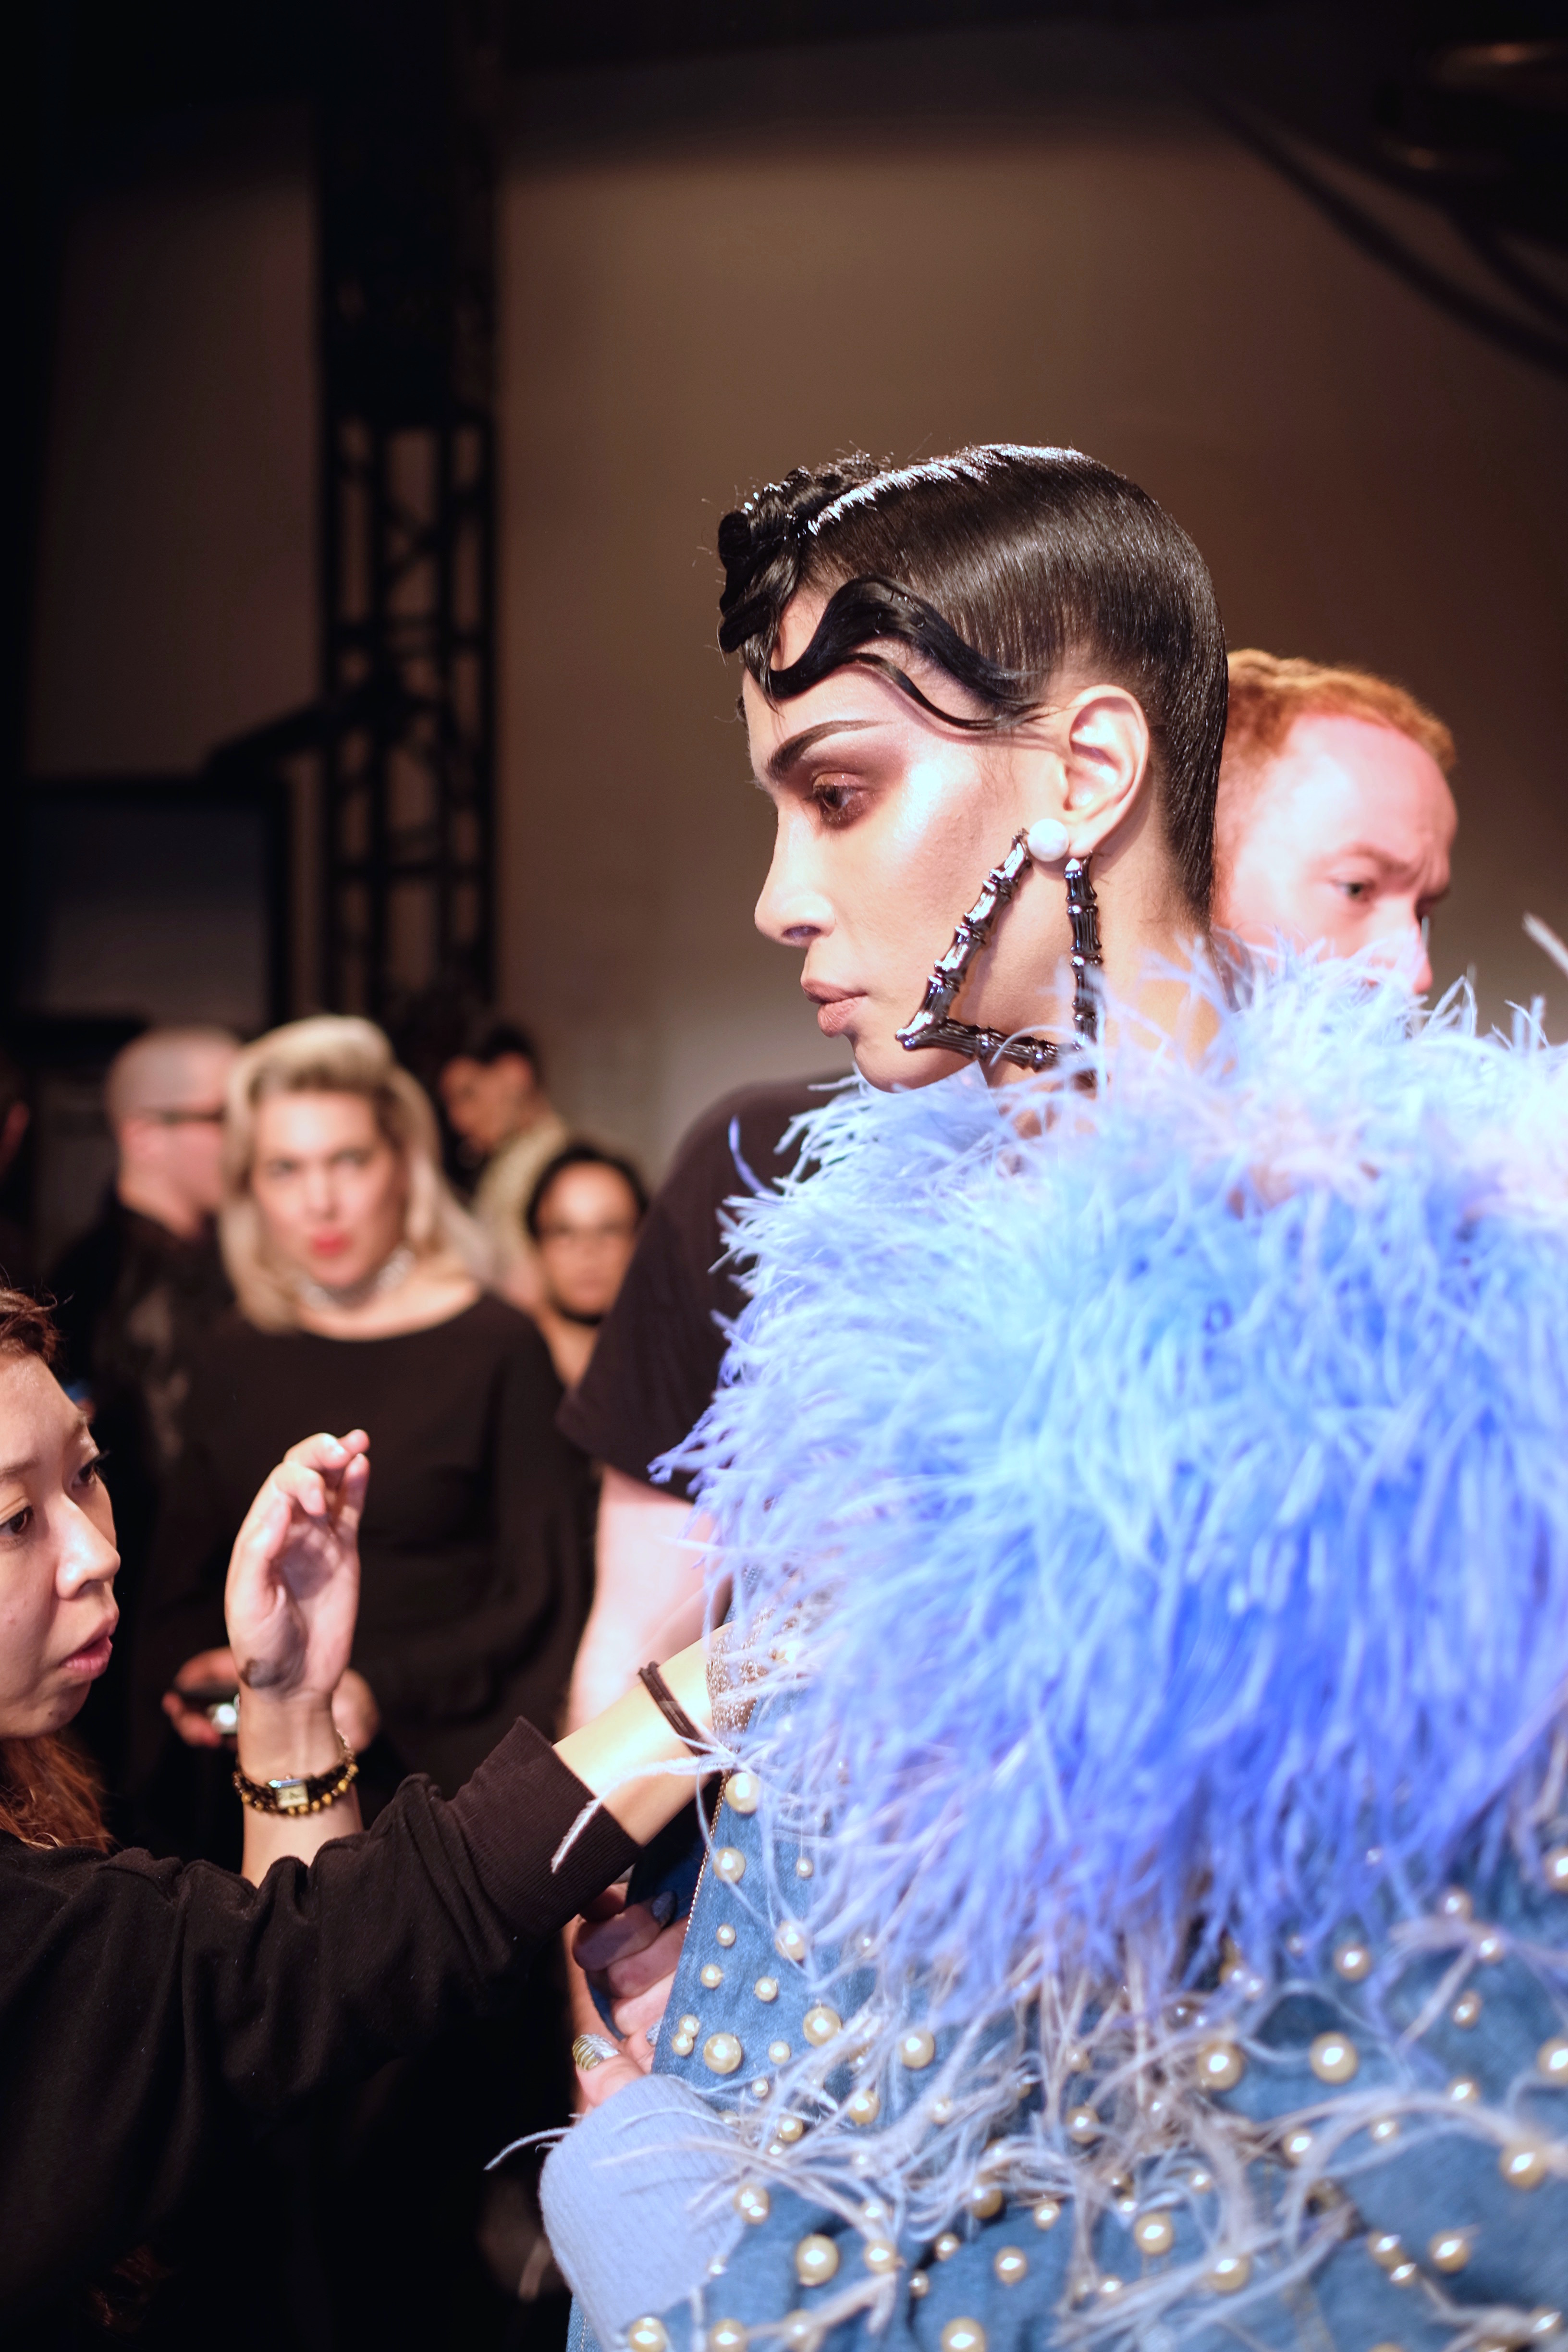 Alicea, poised backstage at The Blonds show this week.